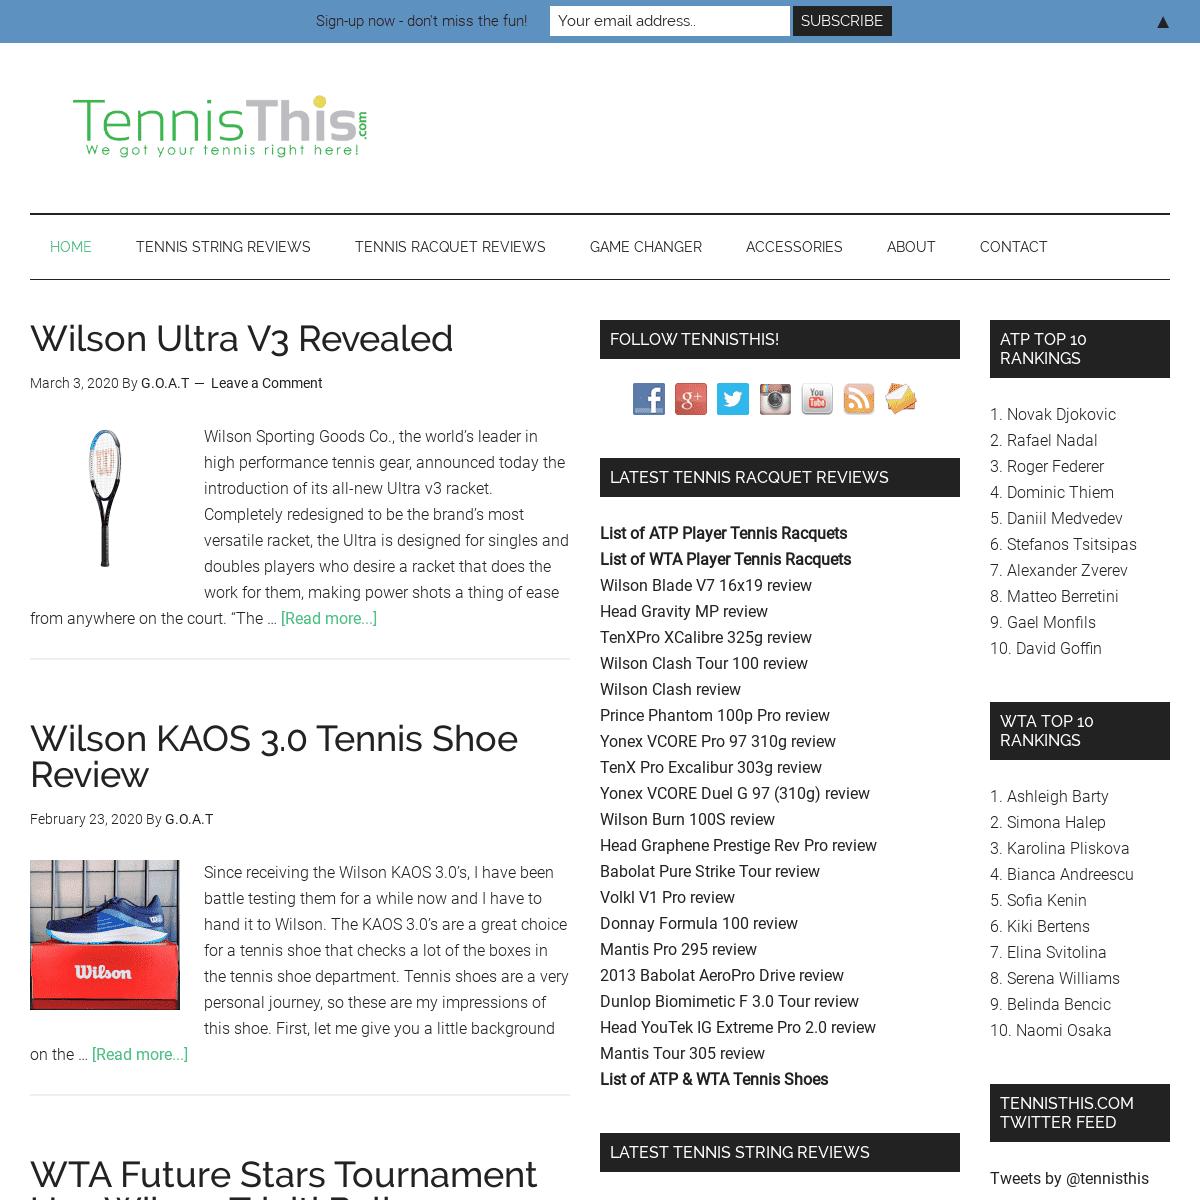 A complete backup of tennisthis.com